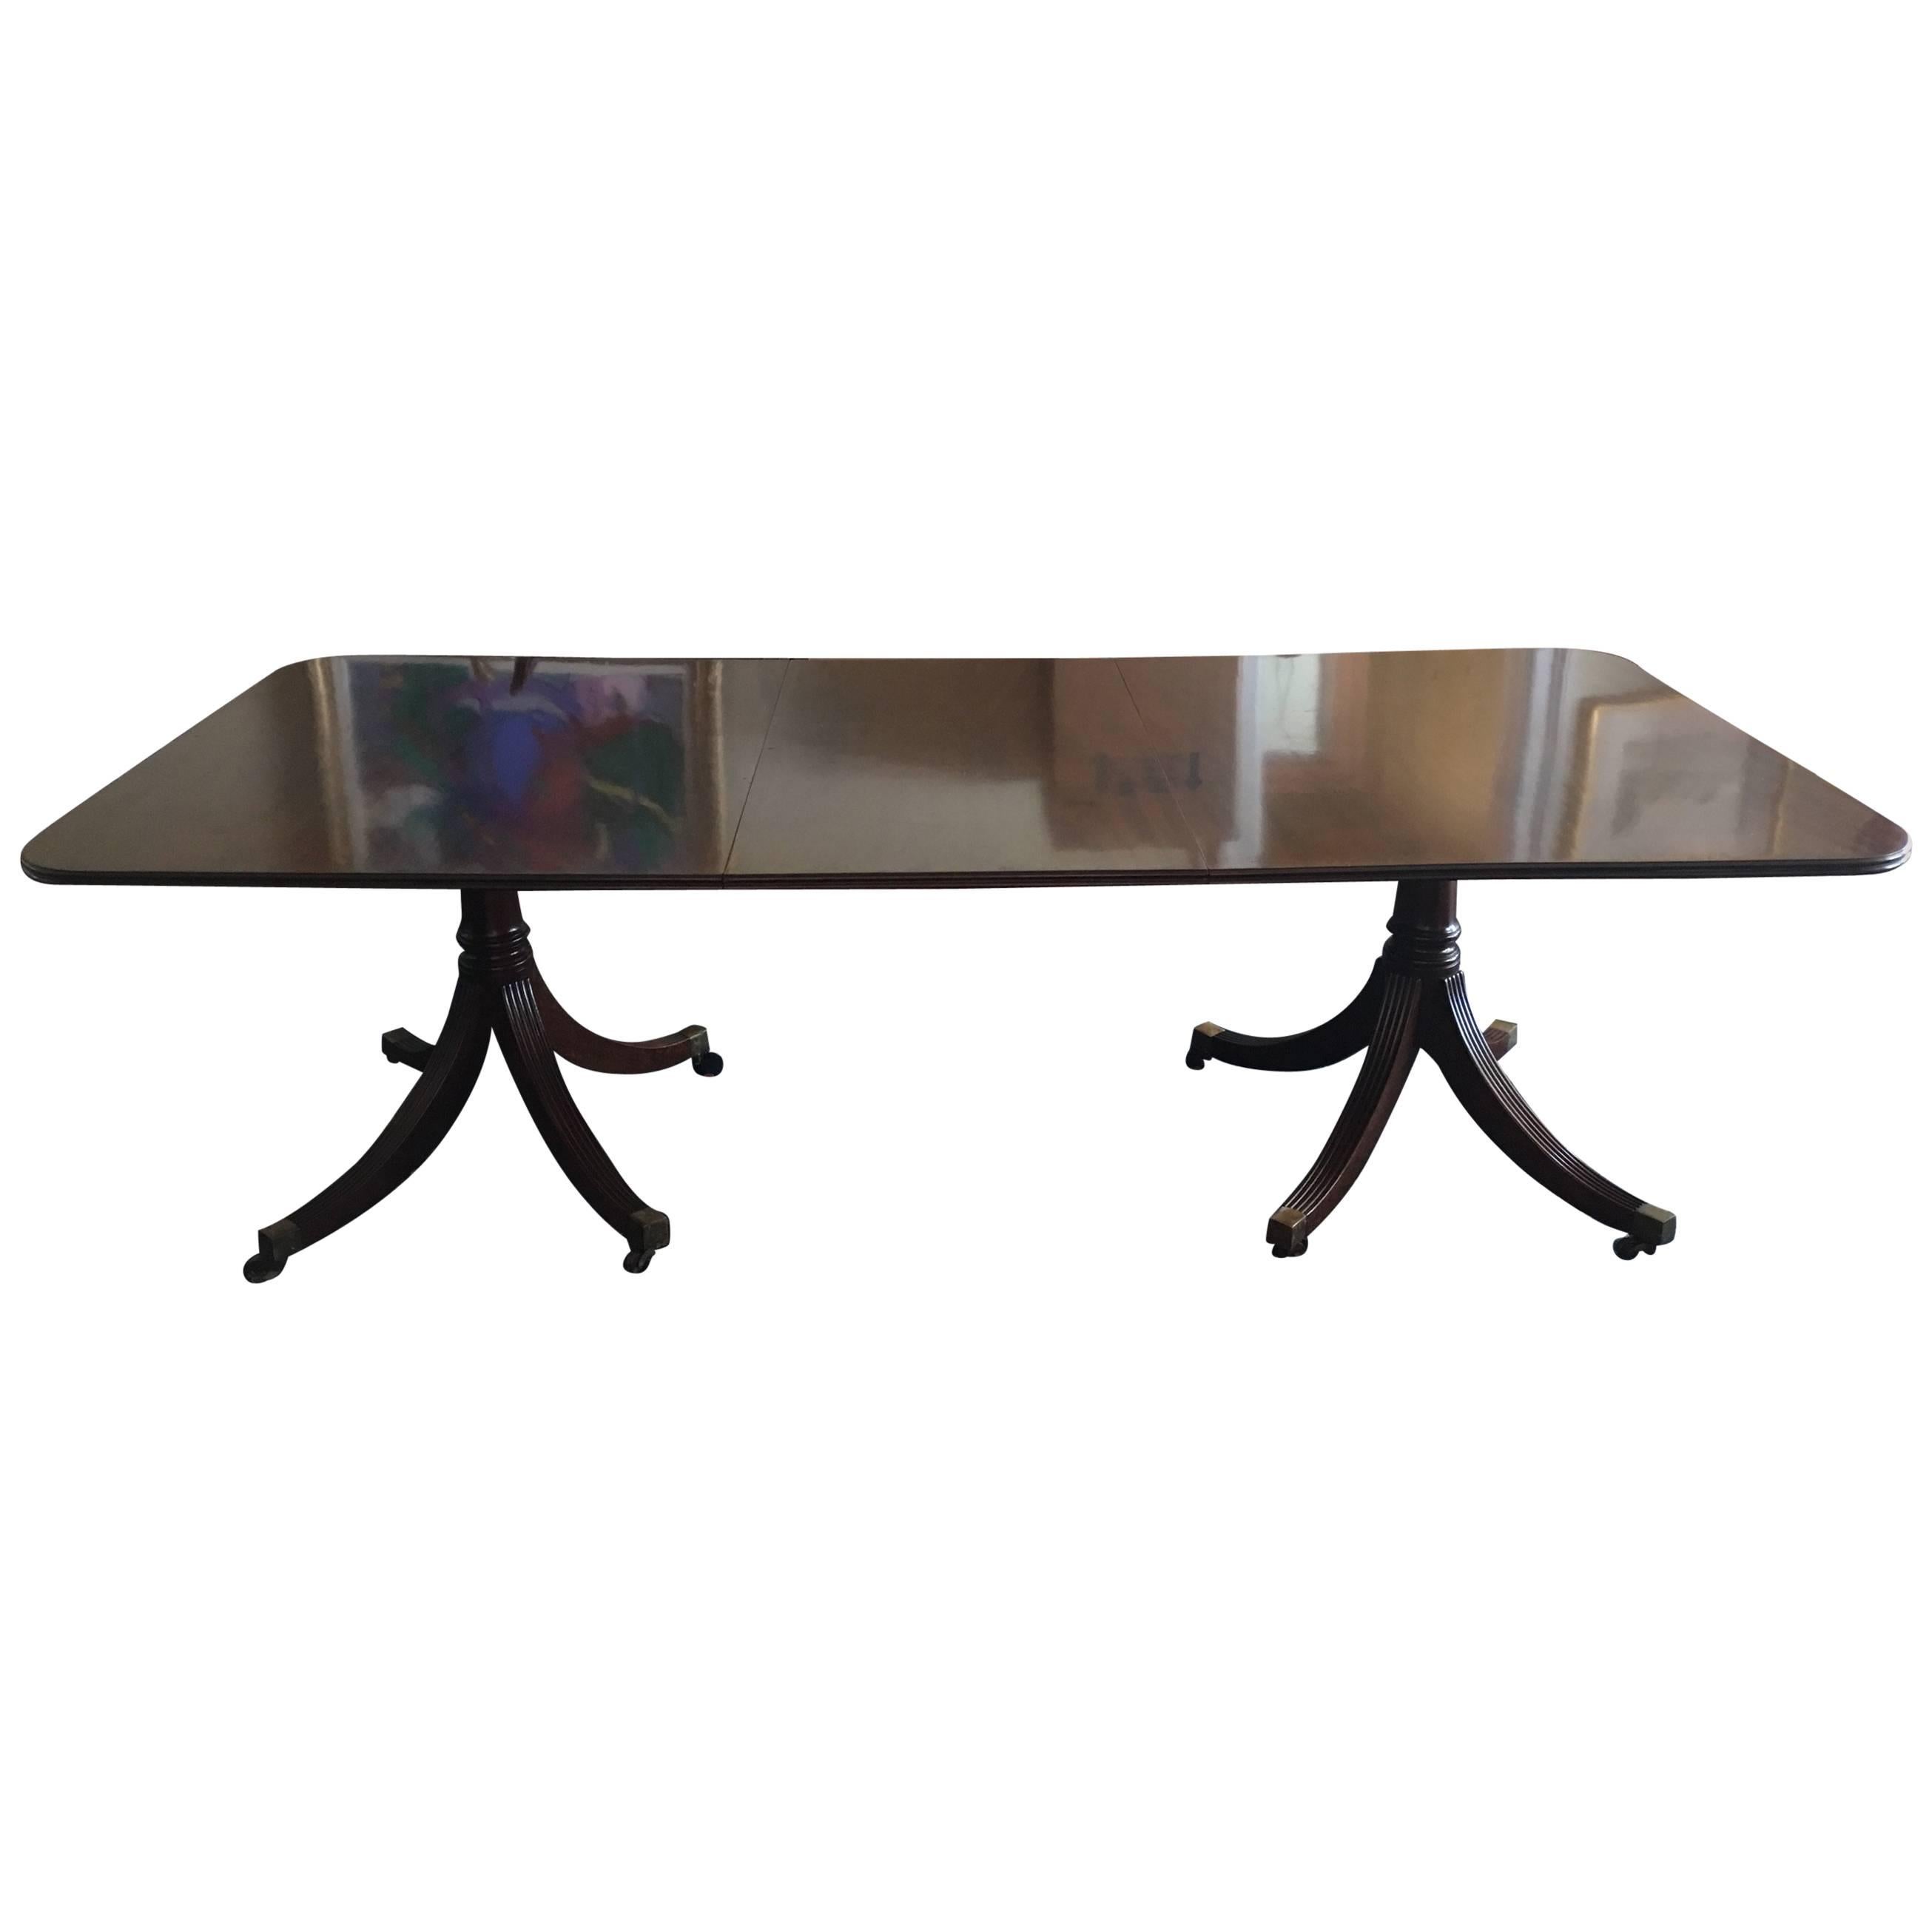 English Georgian Style Mahogany Banquet Dining Table with Leaves, 20th Century